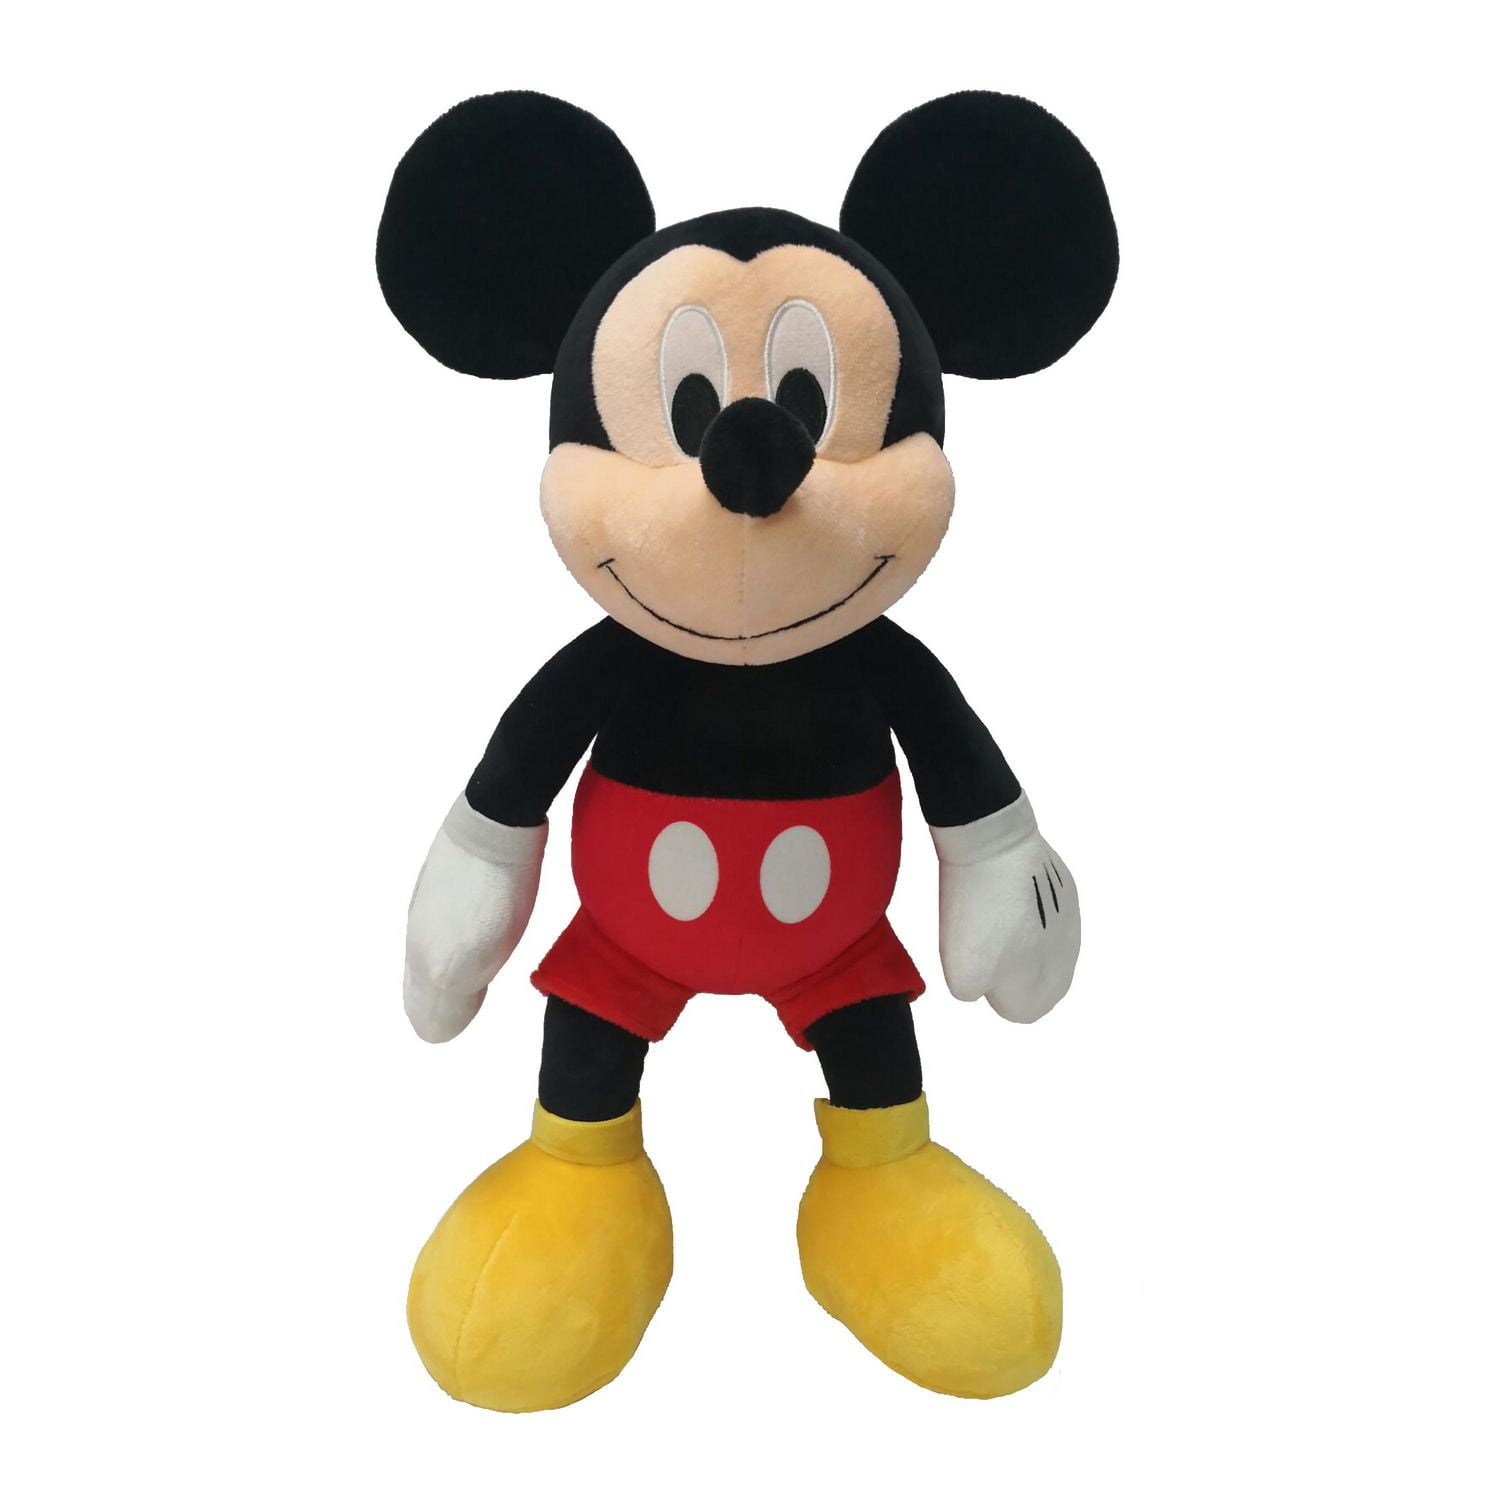 MICKEY MOUSE AND FRIENDS © DISNEY 100TH ANNIVERSARY PLUSH PANTS - Black